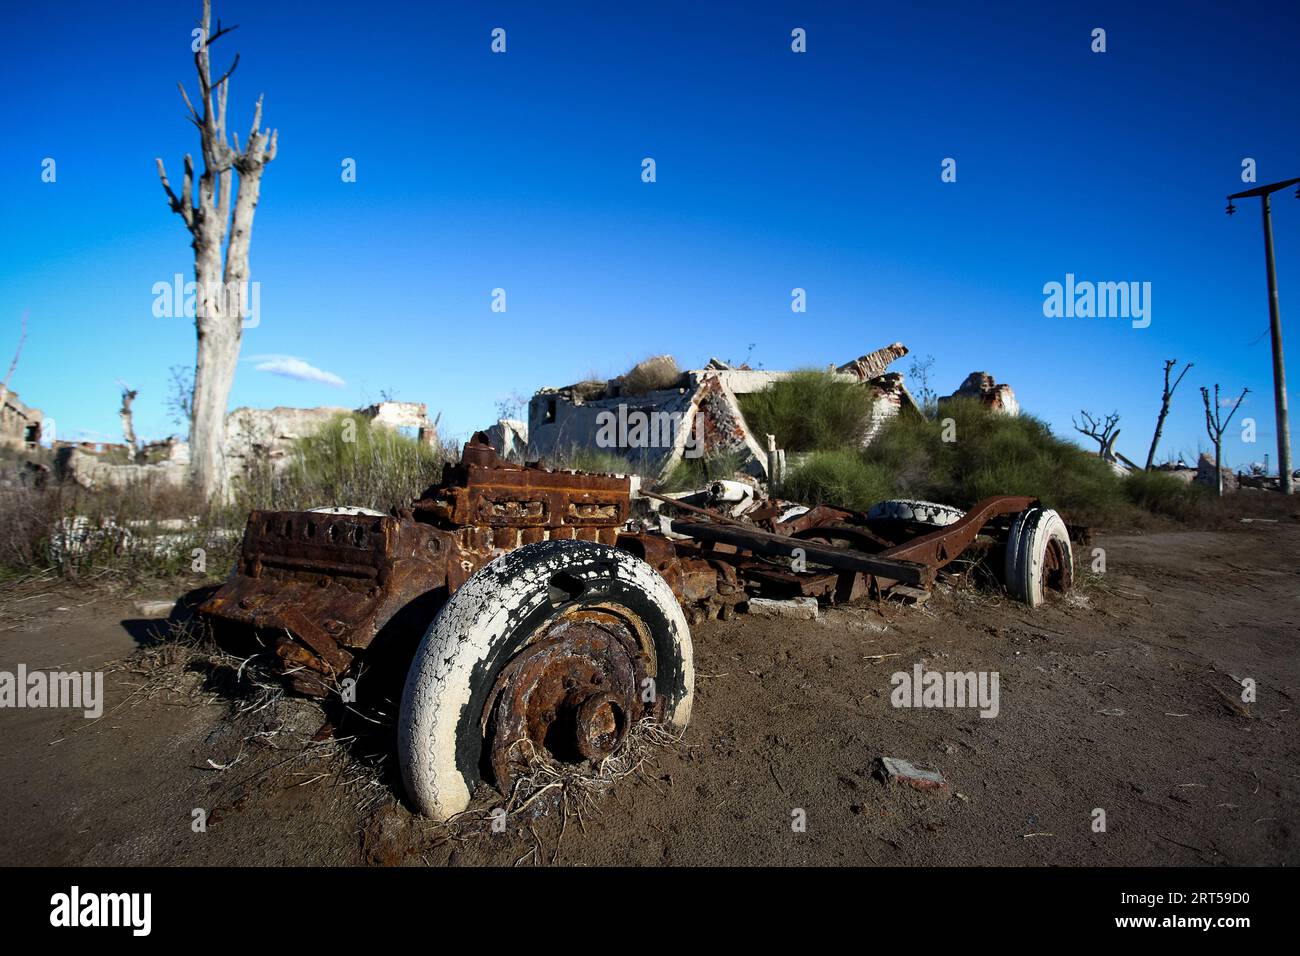 Epecuen, Buenos Aires, Argentina. 23rd Aug, 2023. Old car abandoned in the ruins of Epecuen. Epecuen is the name of a ruinous Argentine tourist town, located 7 km from Carhue, in the district of Adolfo Alsina, province of Buenos Aires. The city was founded in 1921 on the shores of the lake of the same name, it had around 1,500 habitants and was visited by an average of 25,000 tourists during the summer.Its waters are attributed healing properties due to the high level of salinity, which was a tourist attraction in those years. In 1985, a flood caused by the flooding of the lake left the to Stock Photo